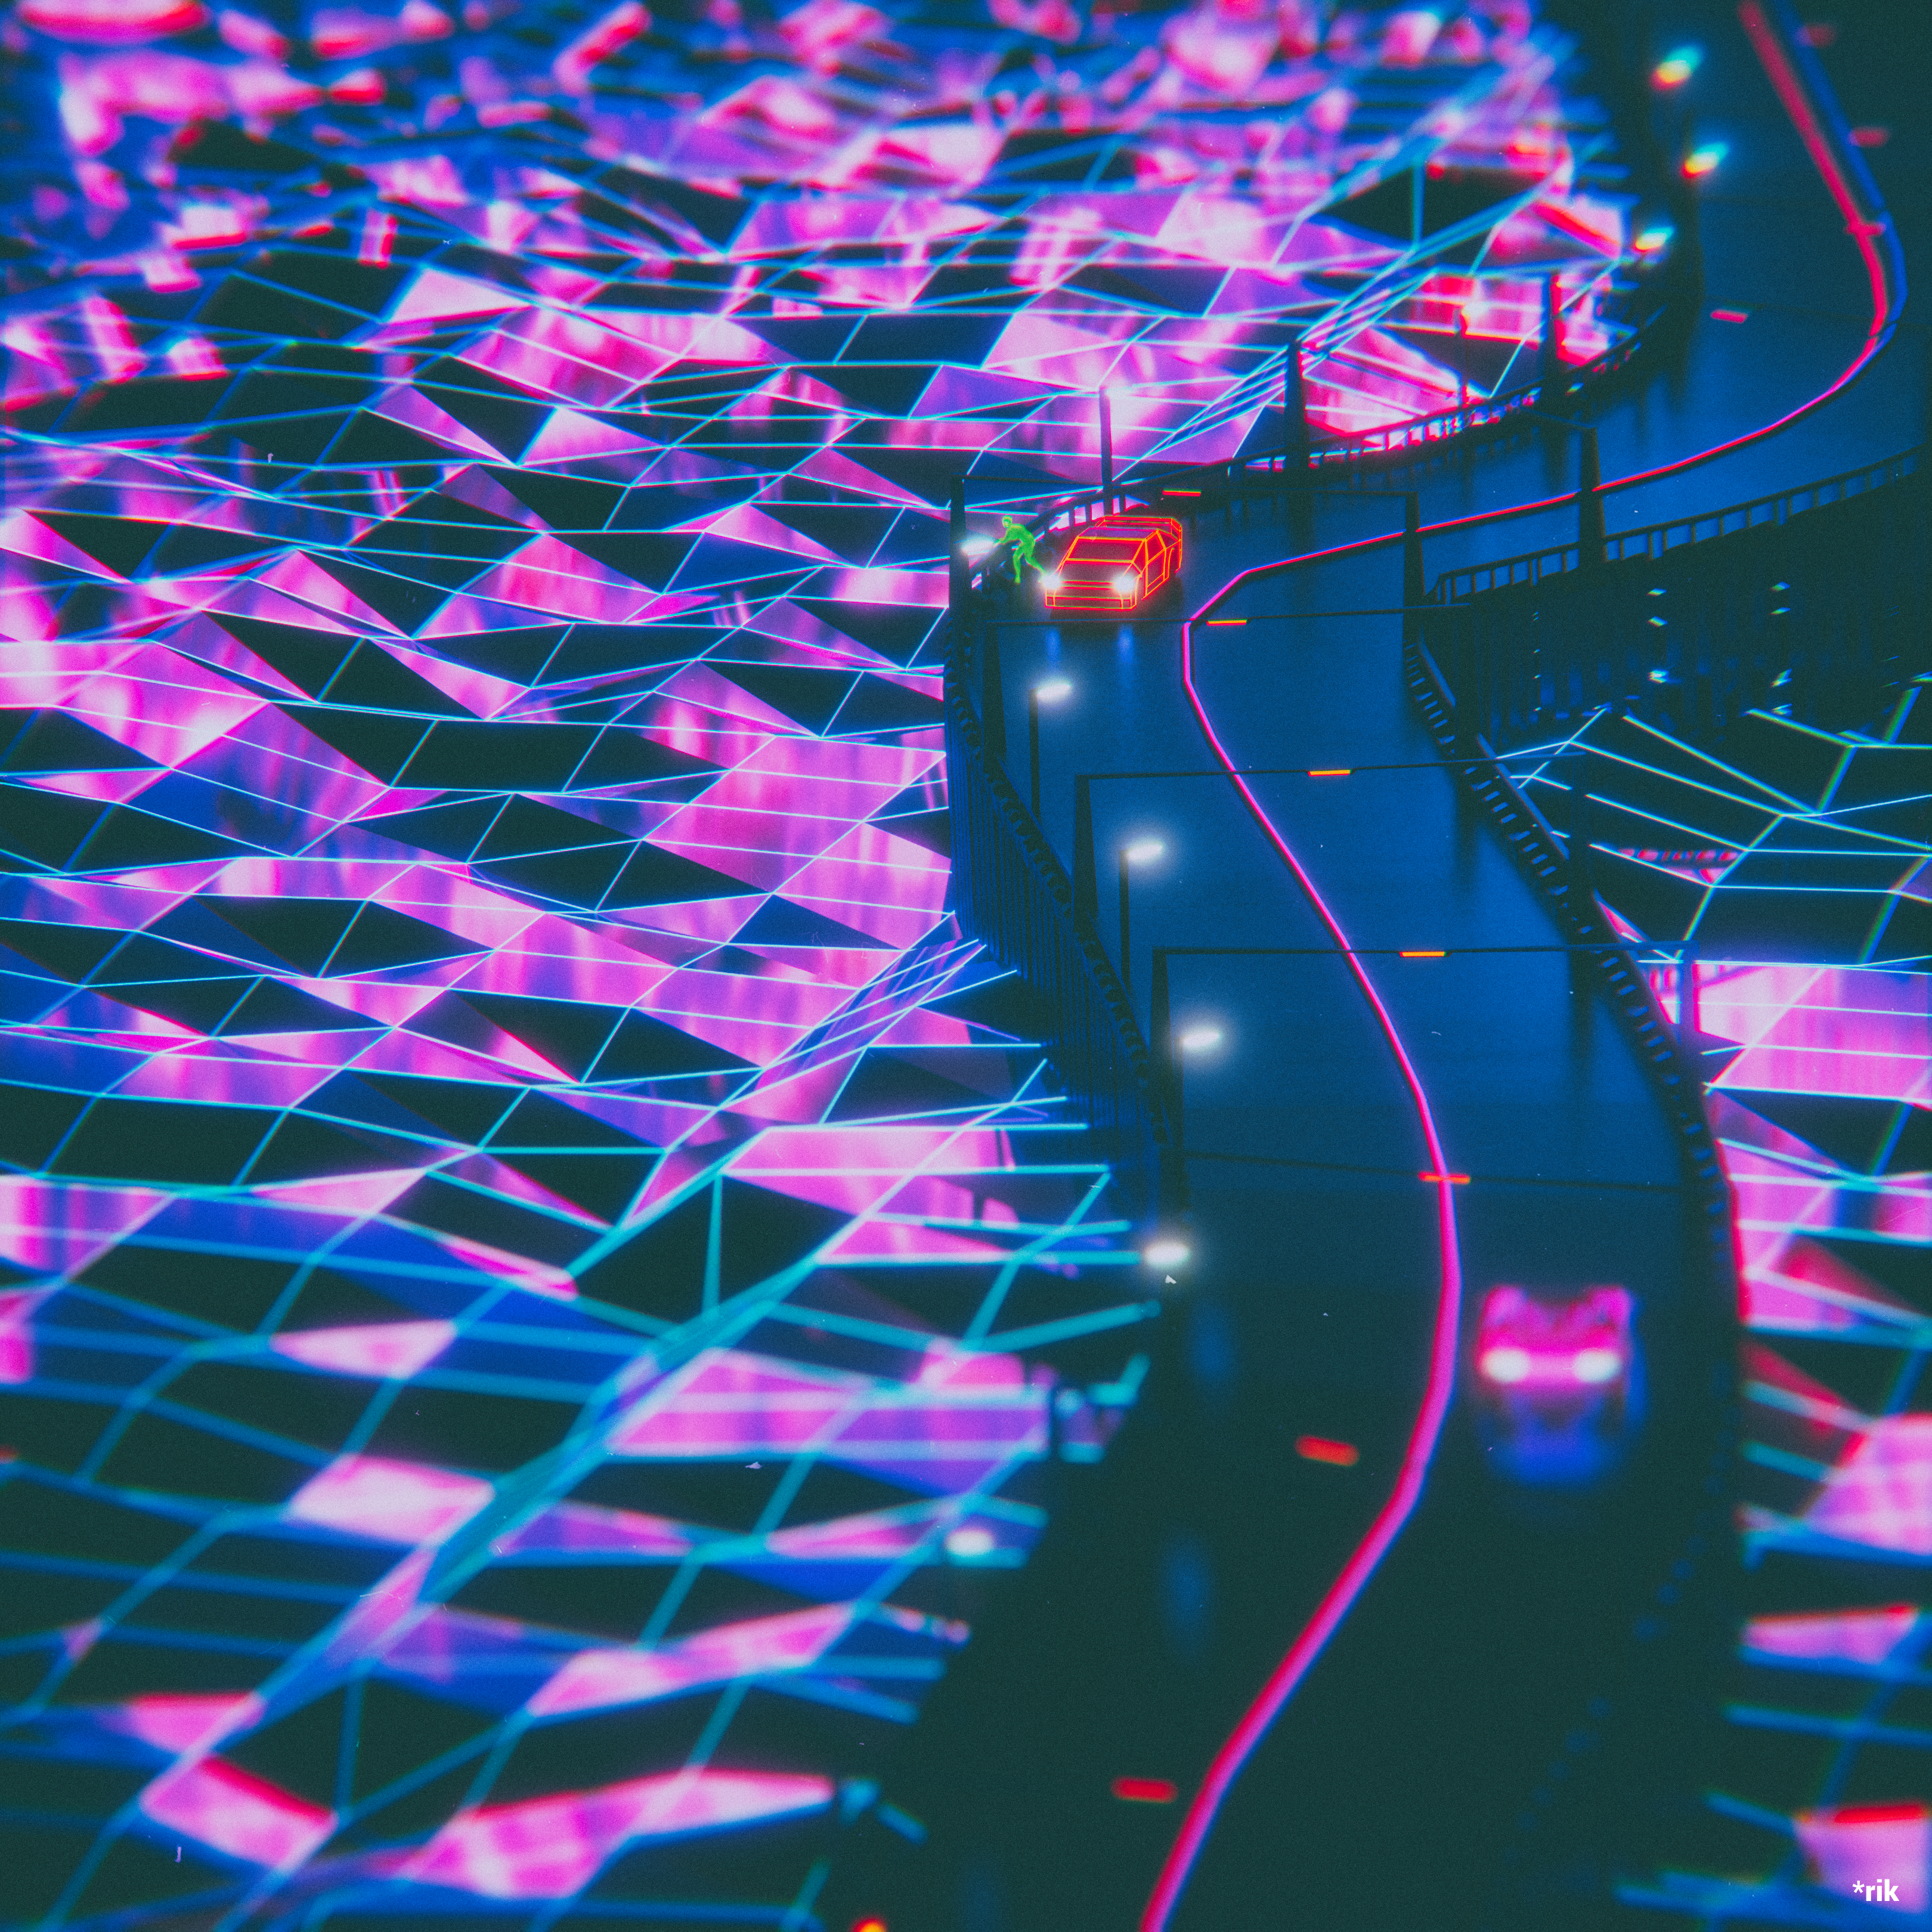 A car on a highway with a digital neon city in the background - Neon, synthwave